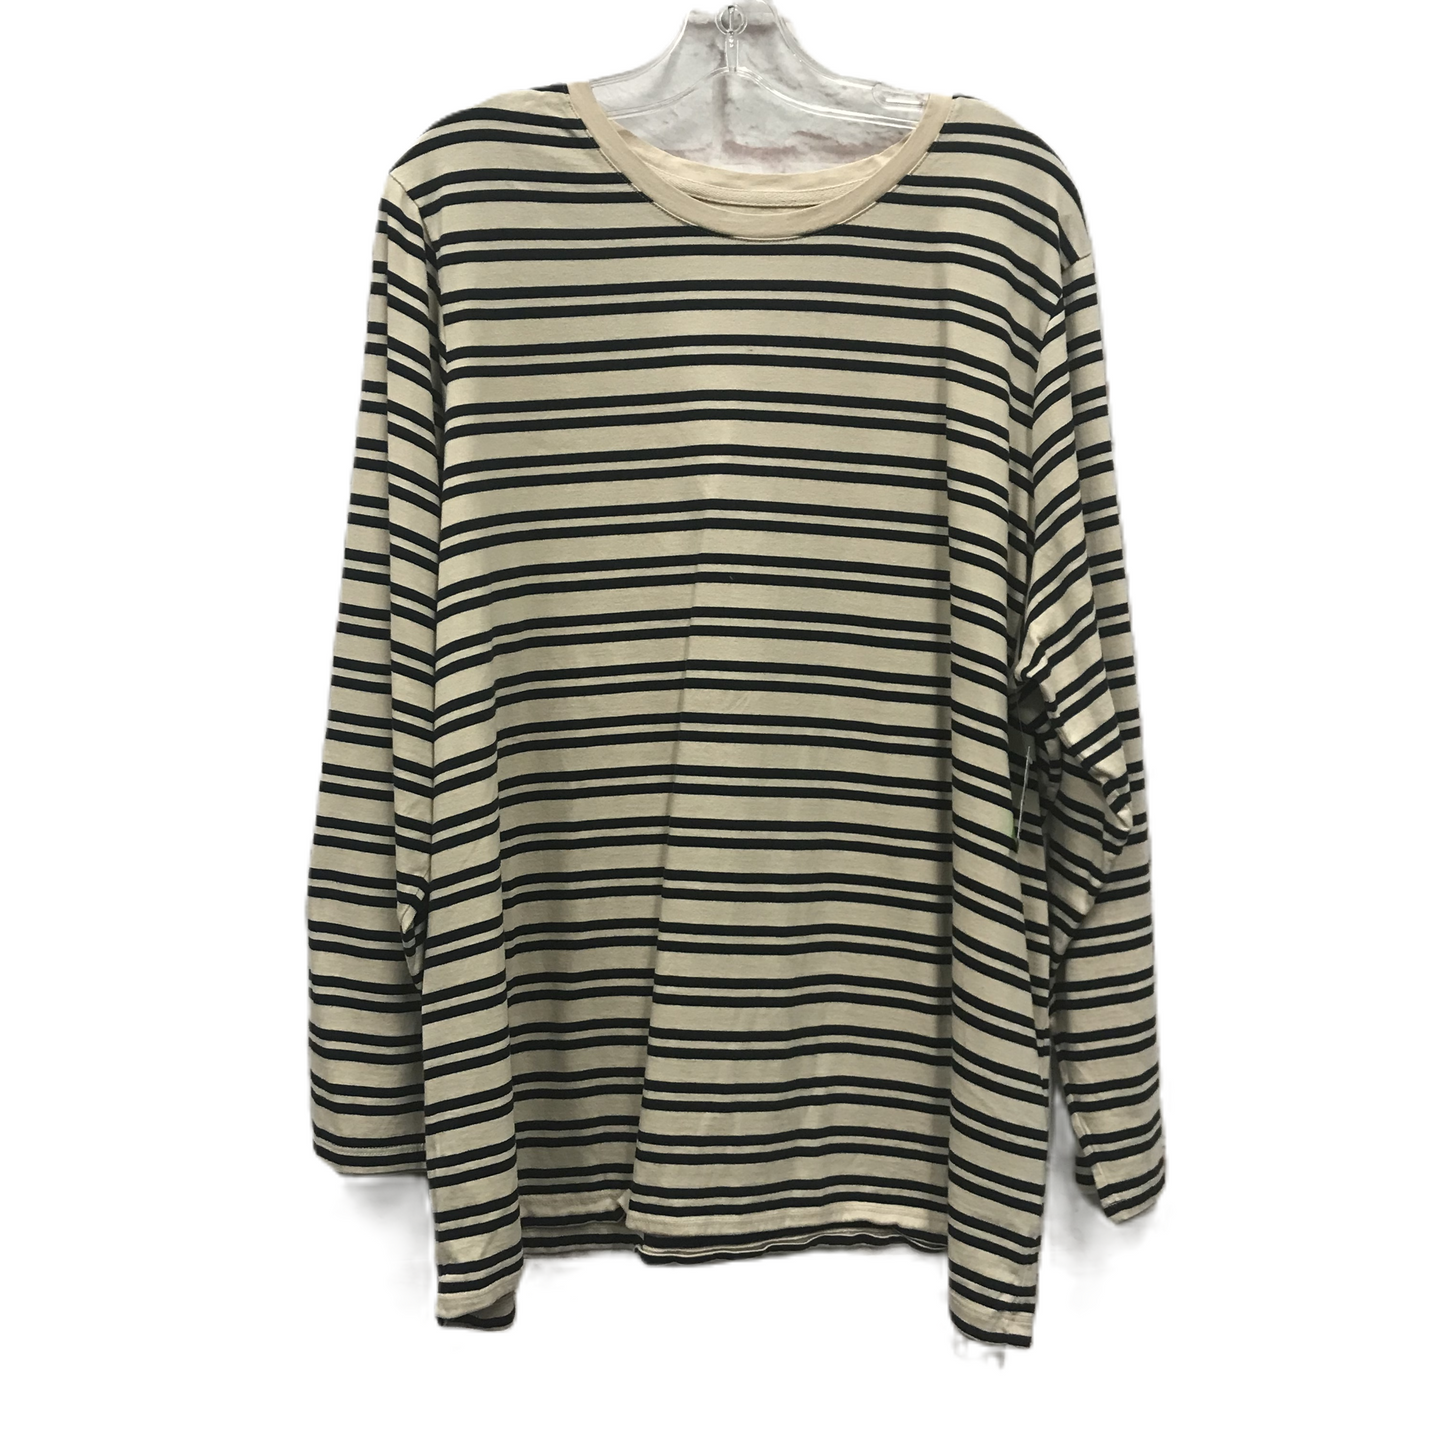 Top Long Sleeve By Lands End  Size: 2x